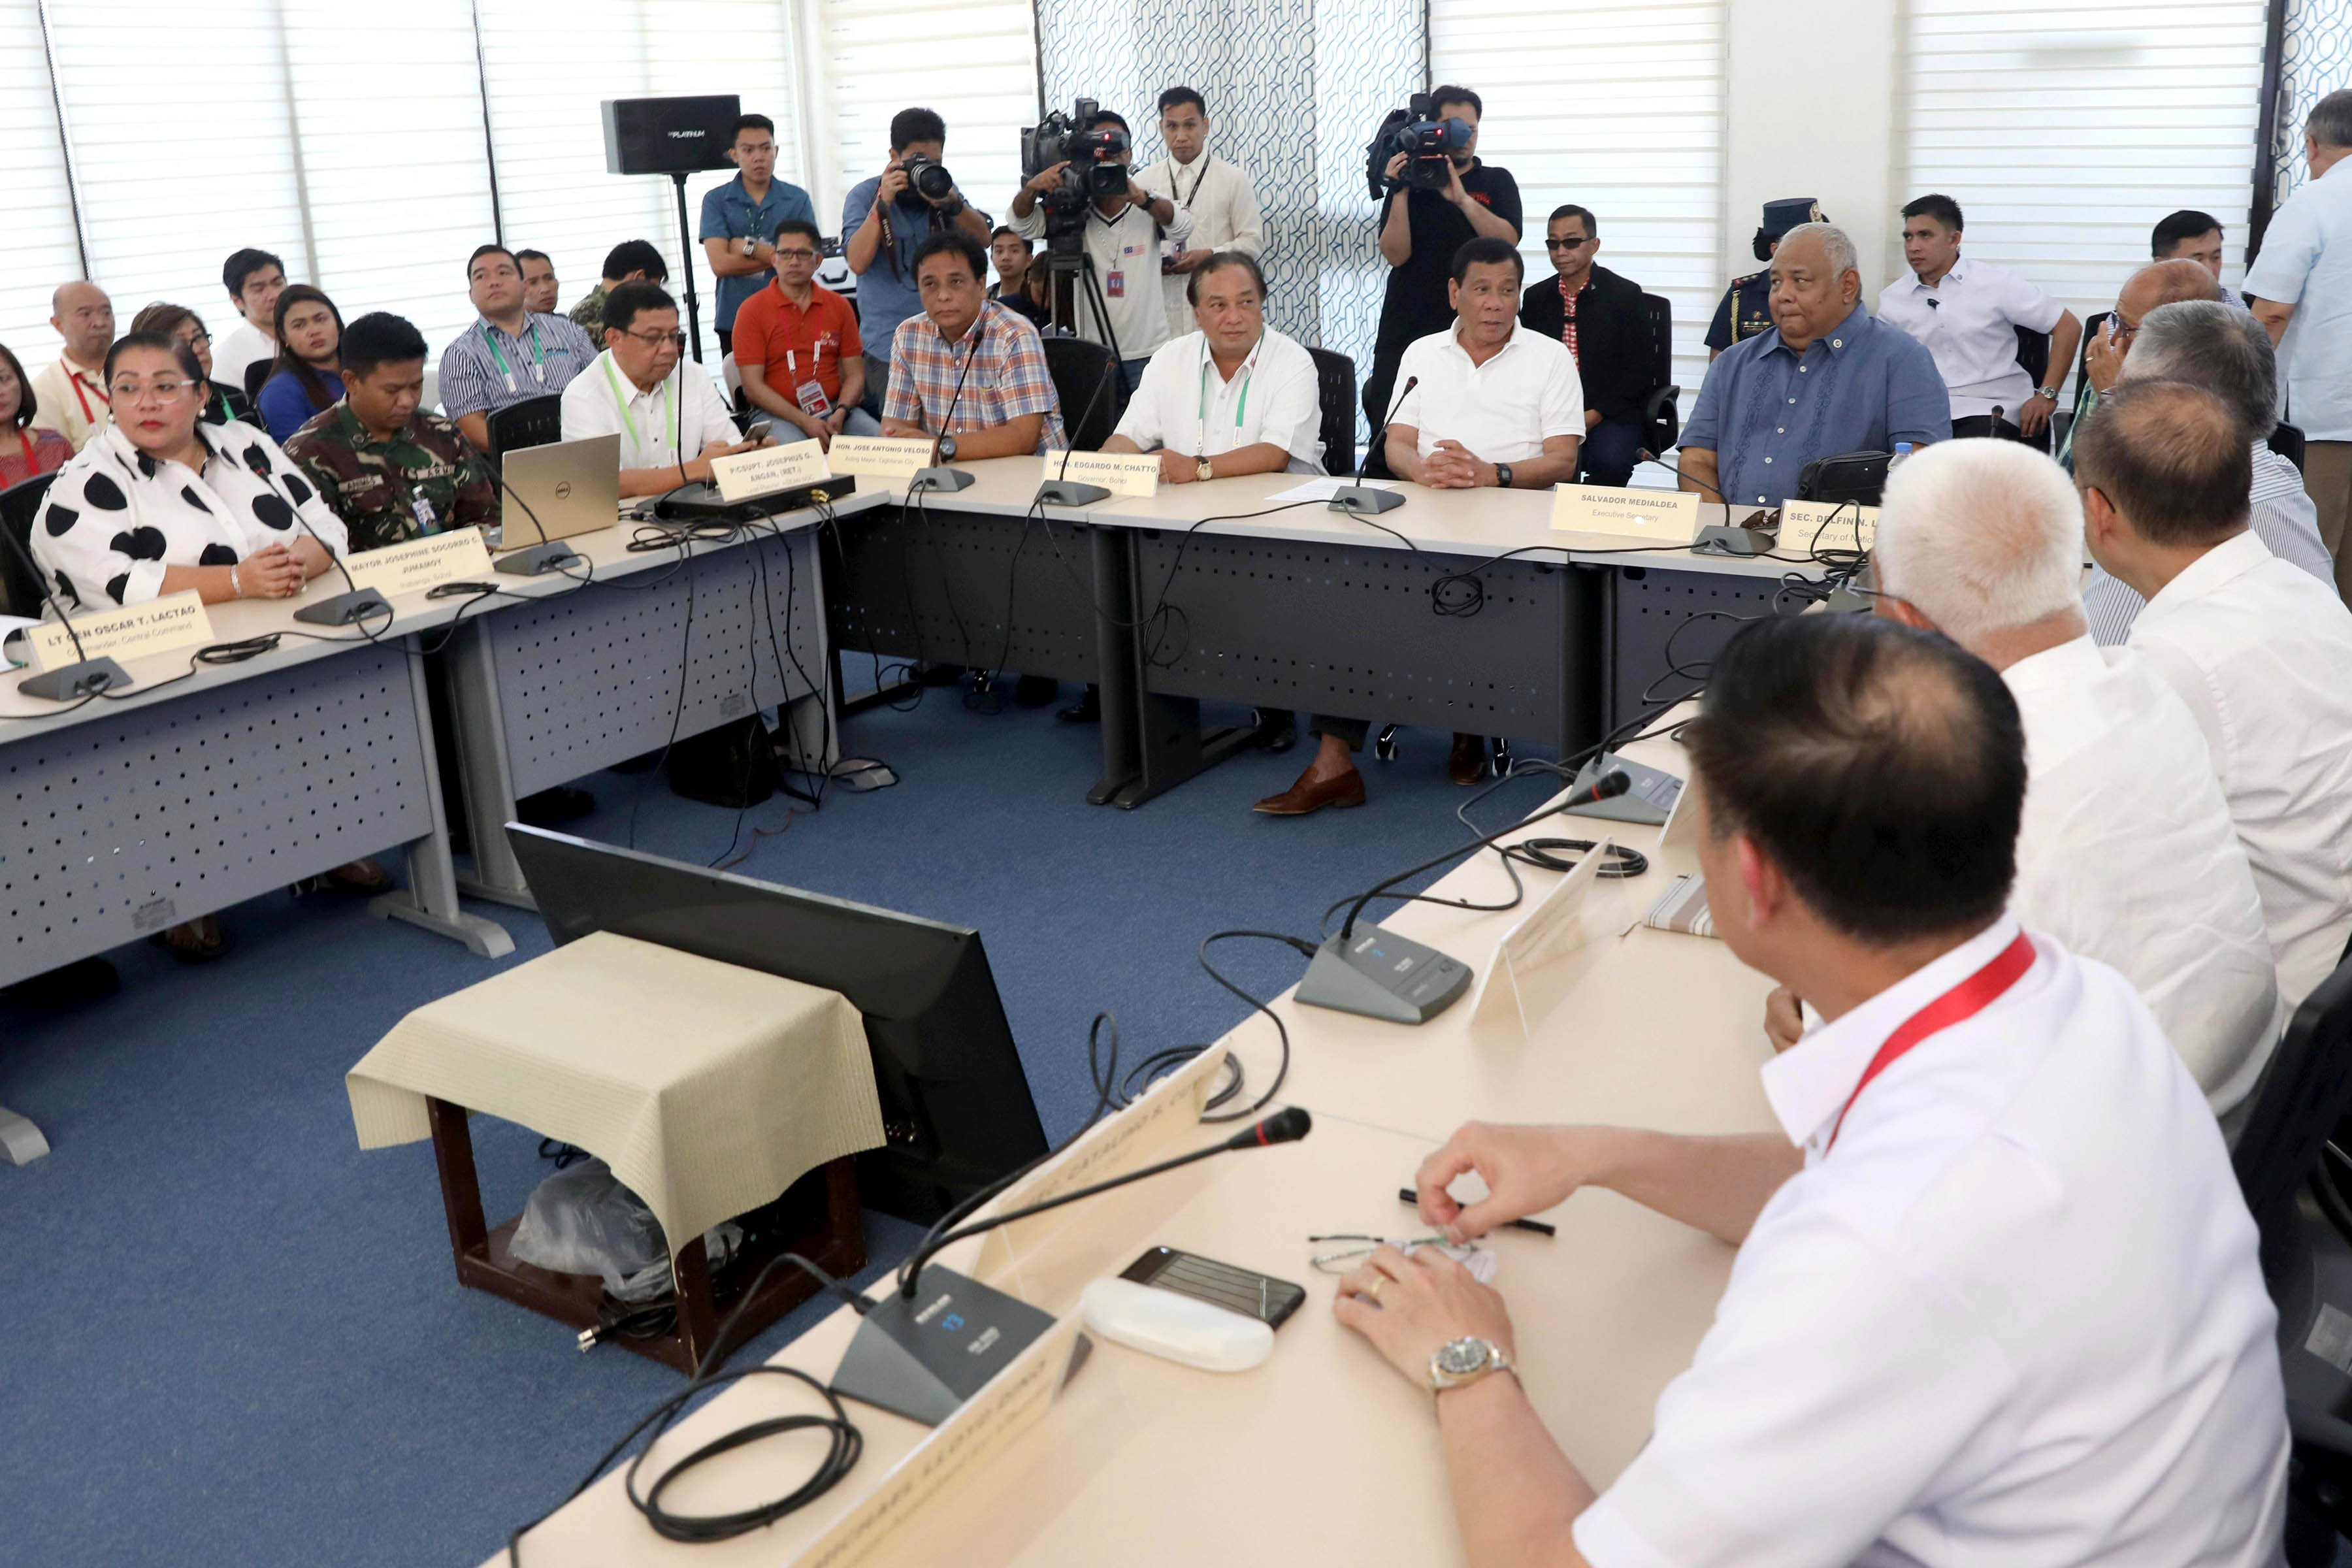 PRRD at the ASEAN Security Briefing in Bohol